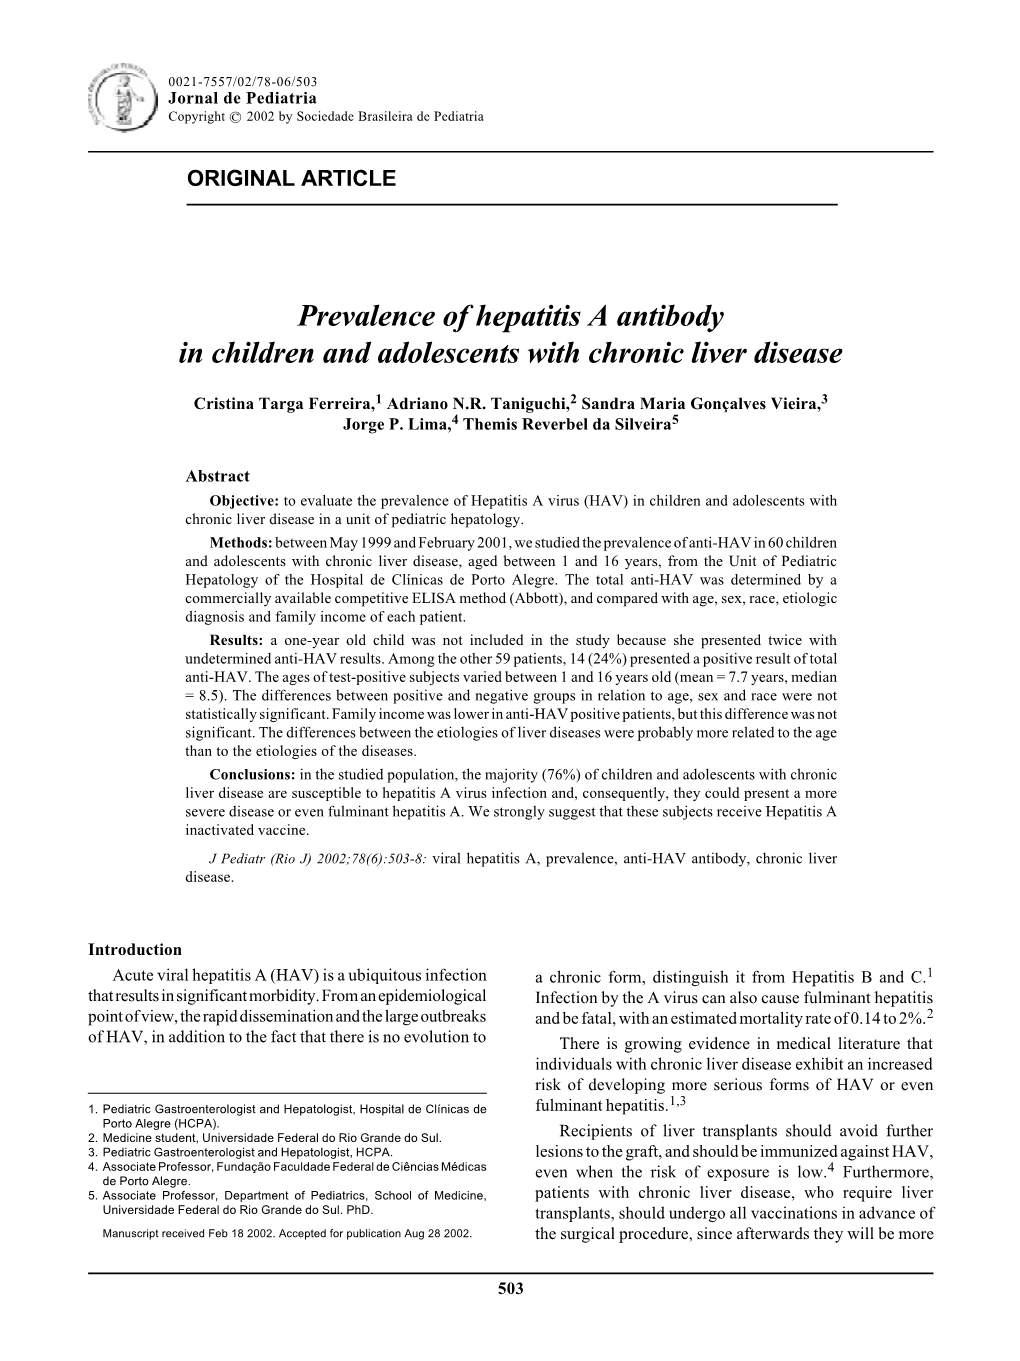 Prevalence of Hepatitis a Antibody in Children and Adolescents with Chronic Liver Disease